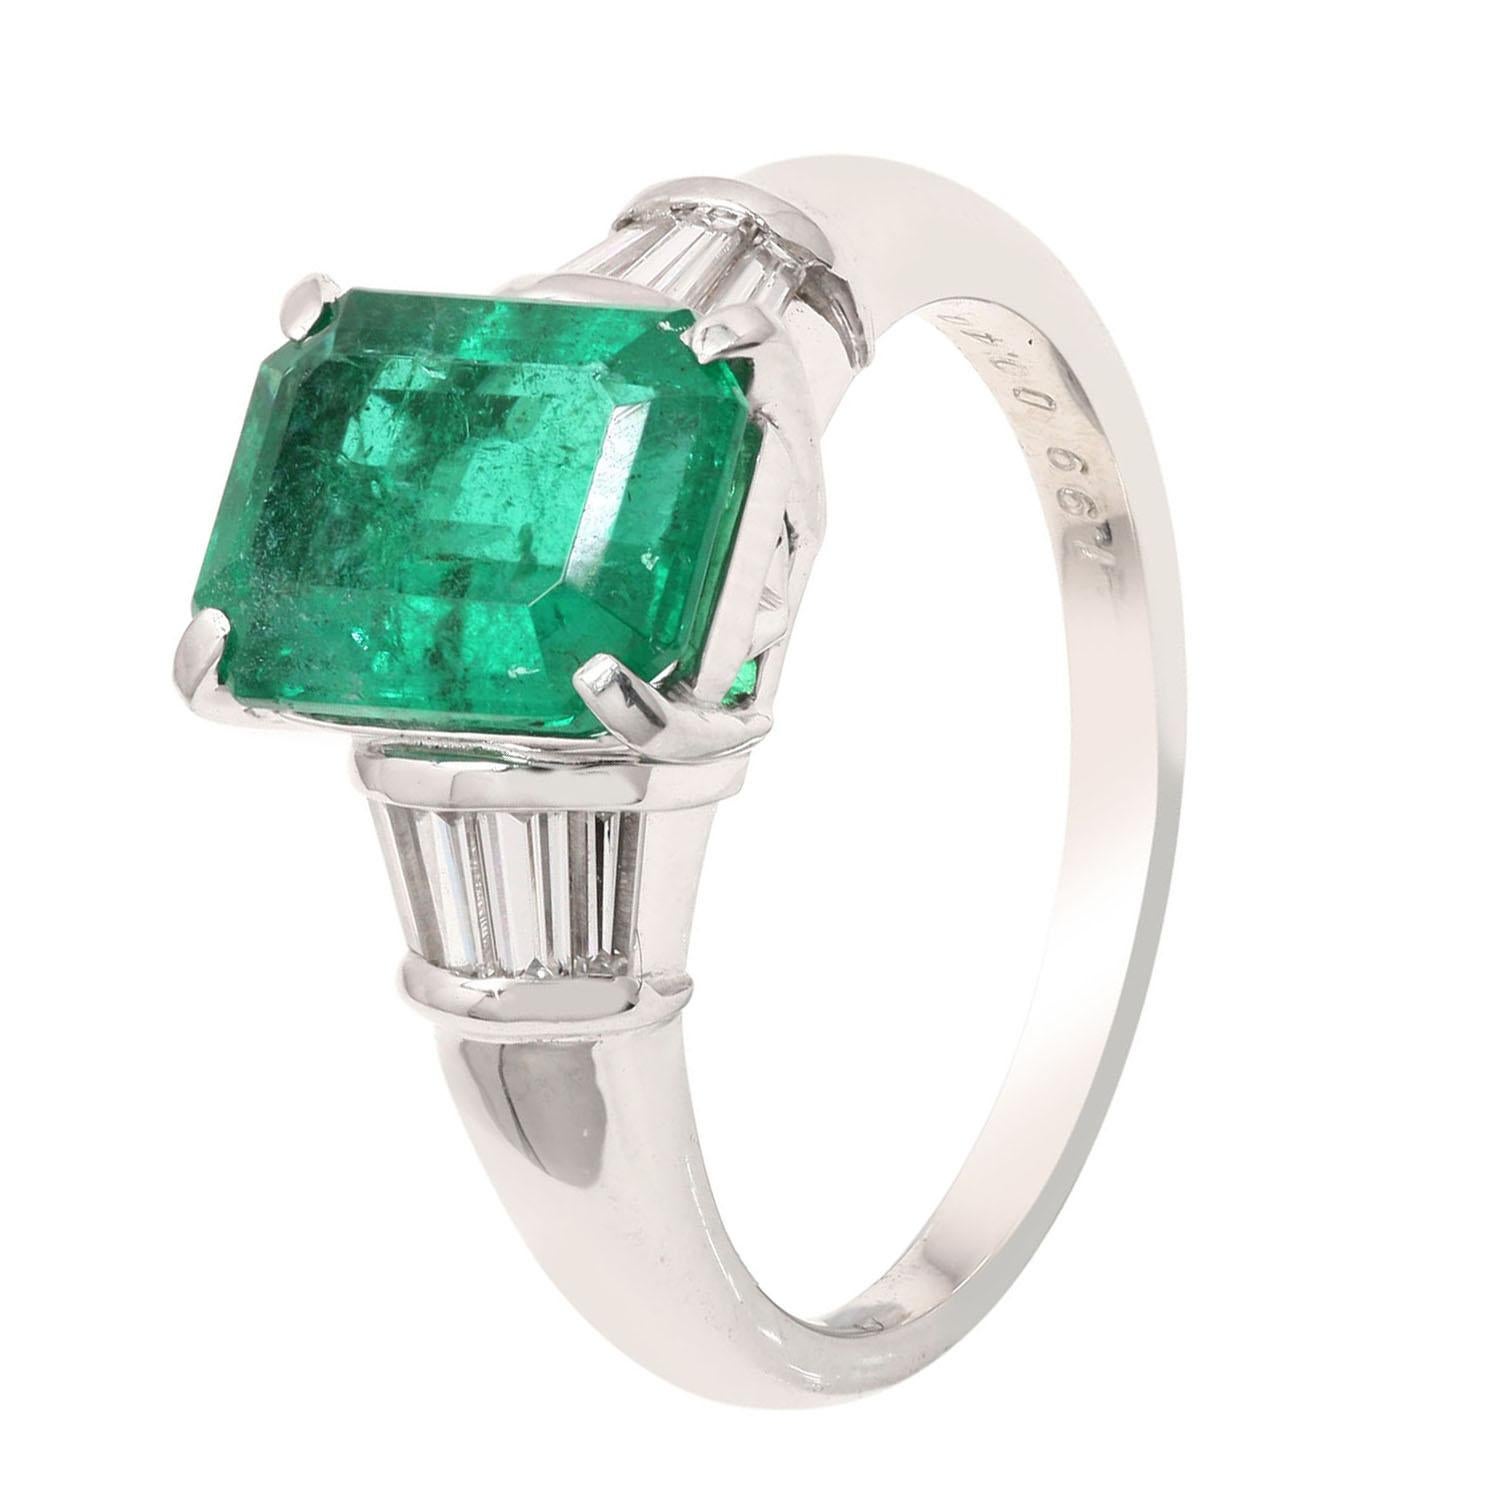 Art Nouveau Zambian Emerald Cocktail Ring with Baguette Diamonds Made in 18k White Gold For Sale